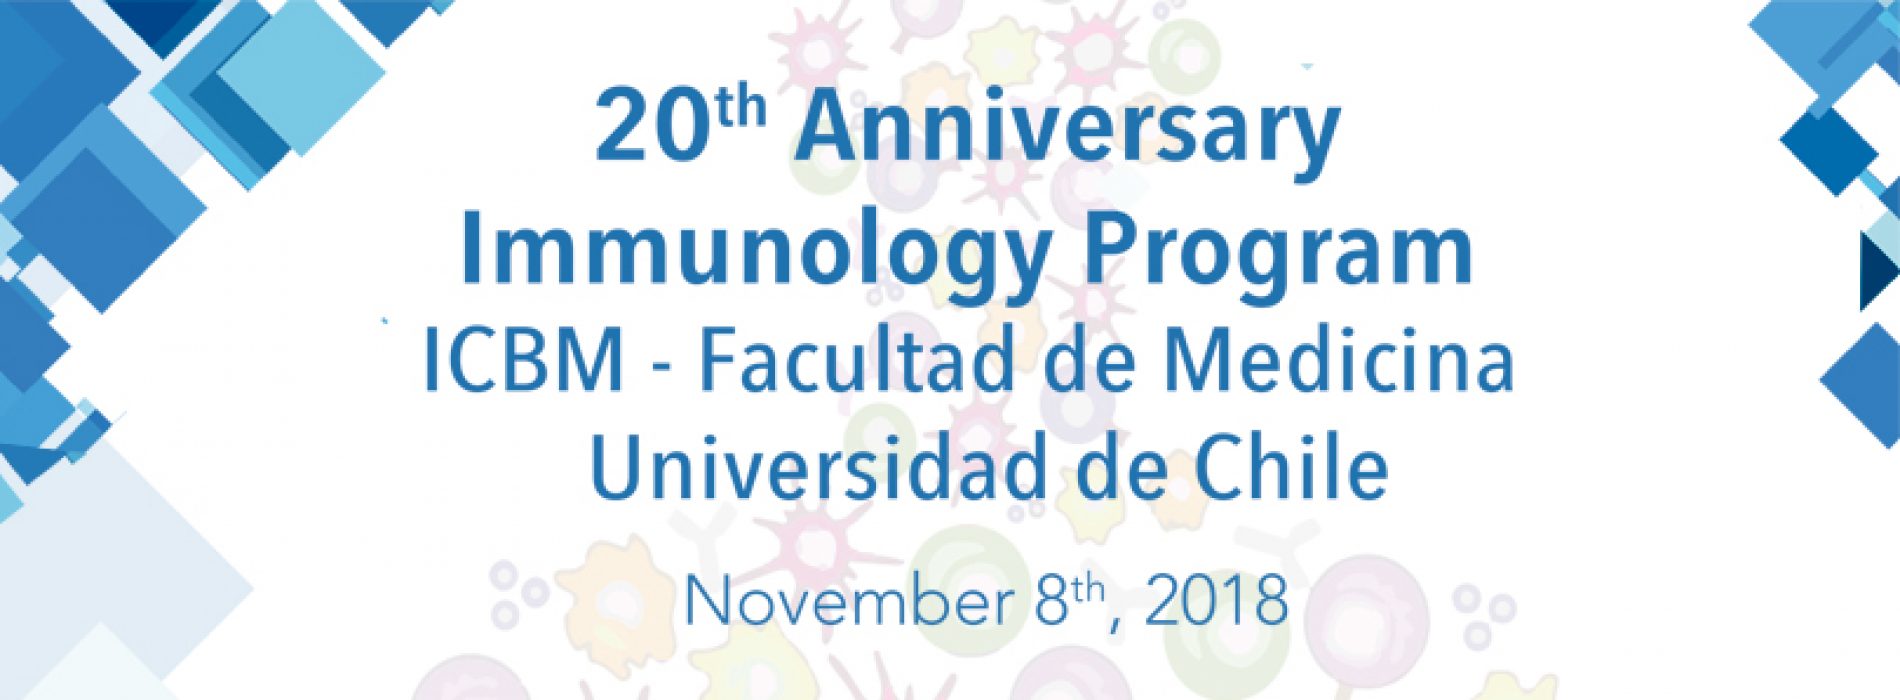 20th anniversary of the disciplinary program of Immunology